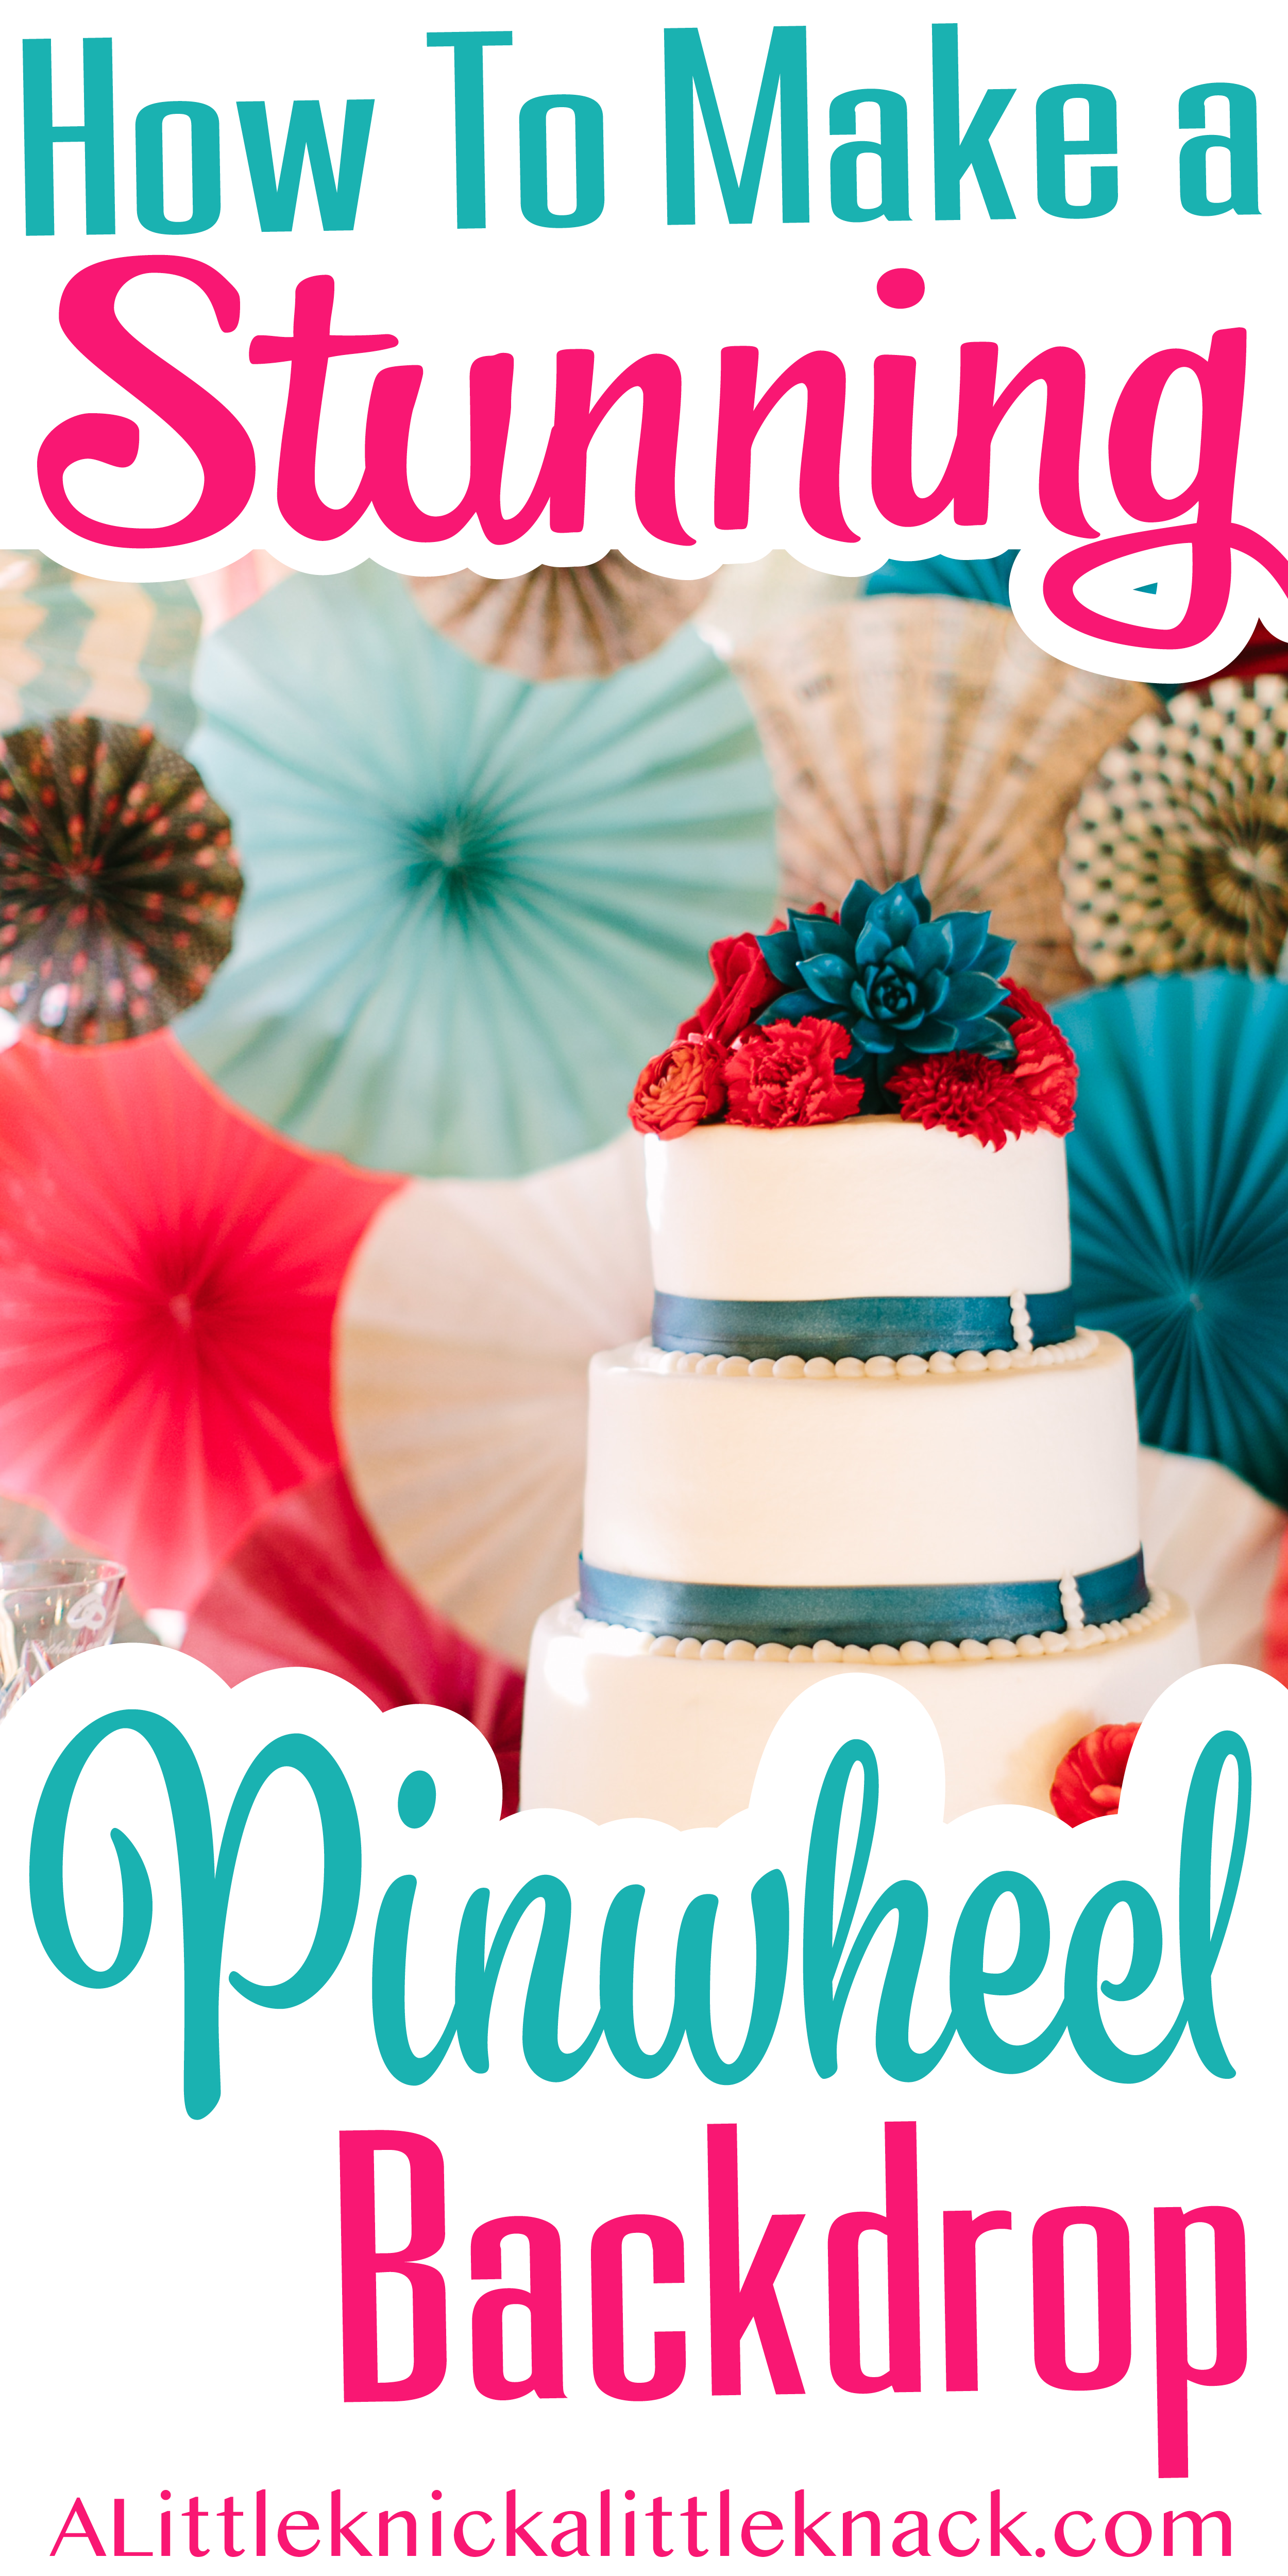 A wedding cake in front of a colorful paper pinwheel backdrop with a text overlay